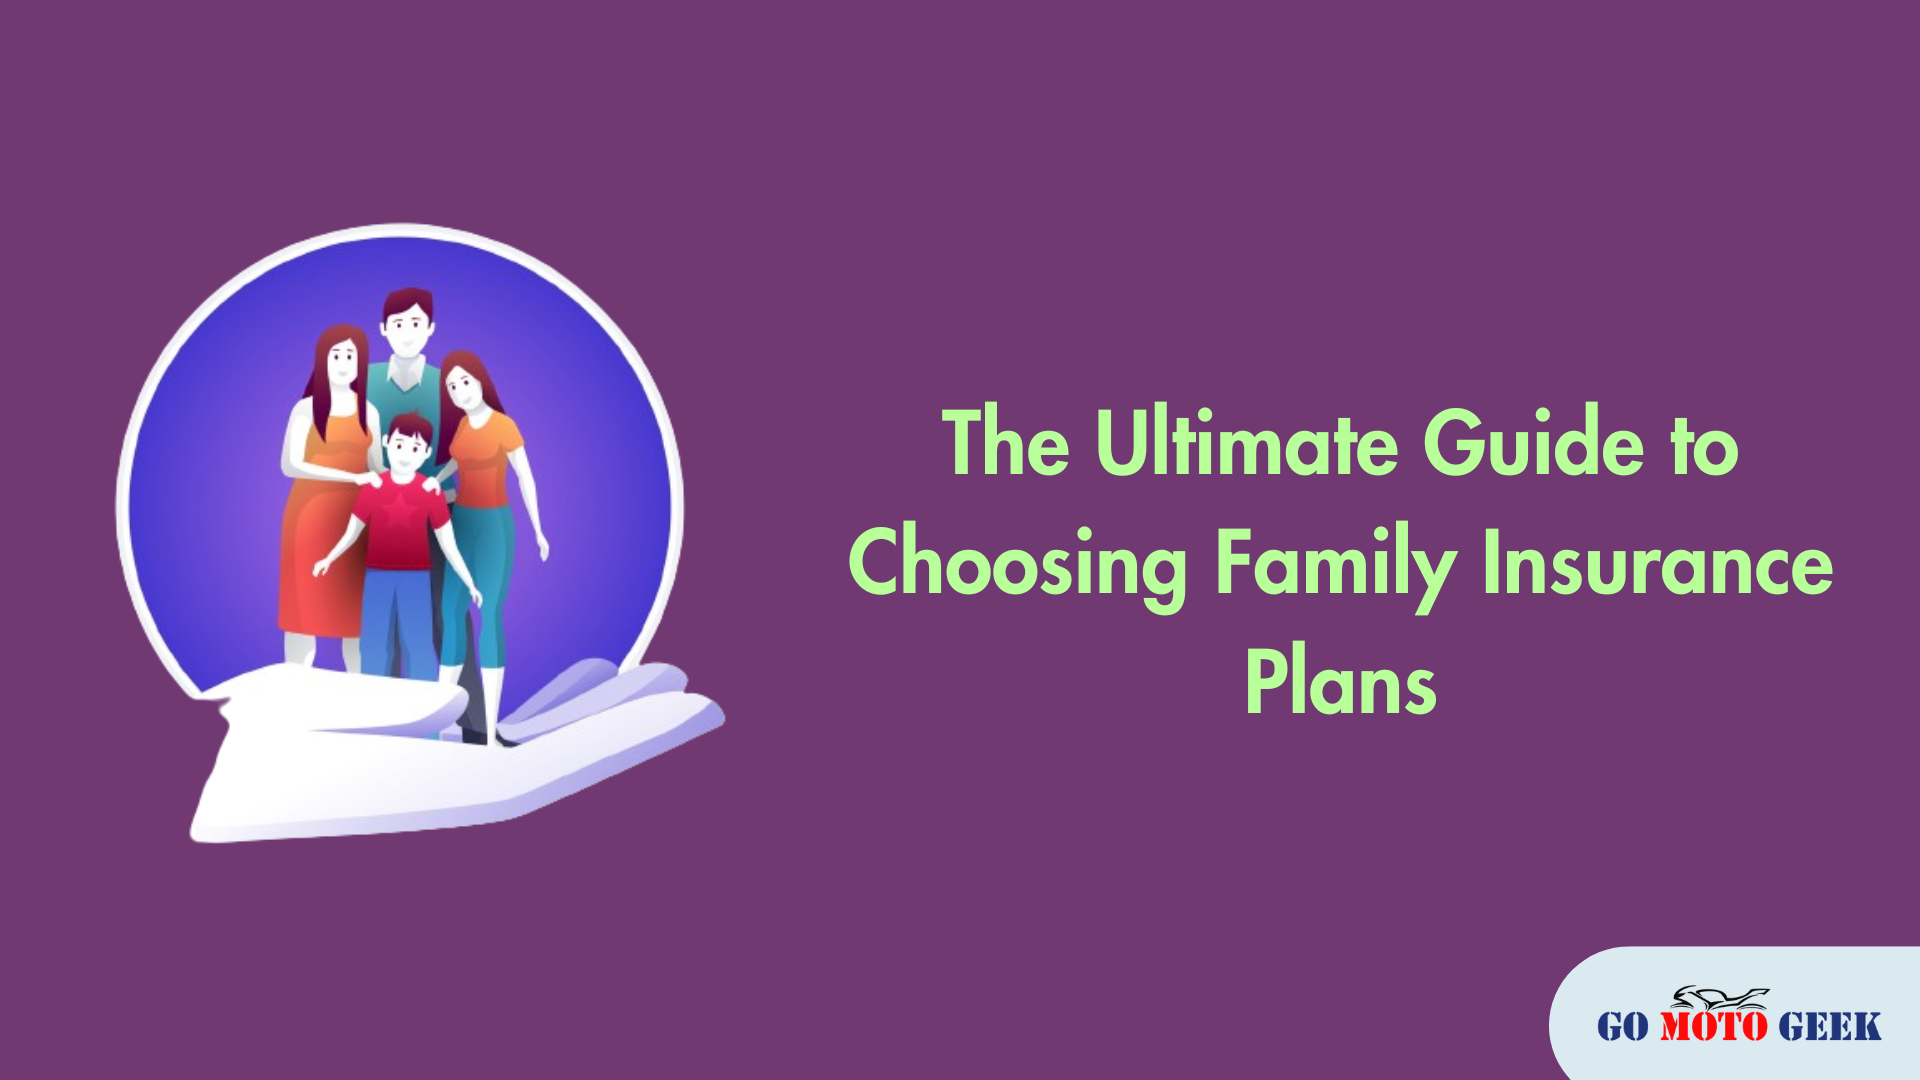 The Ultimate Guide to Choosing Family Insurance Plans